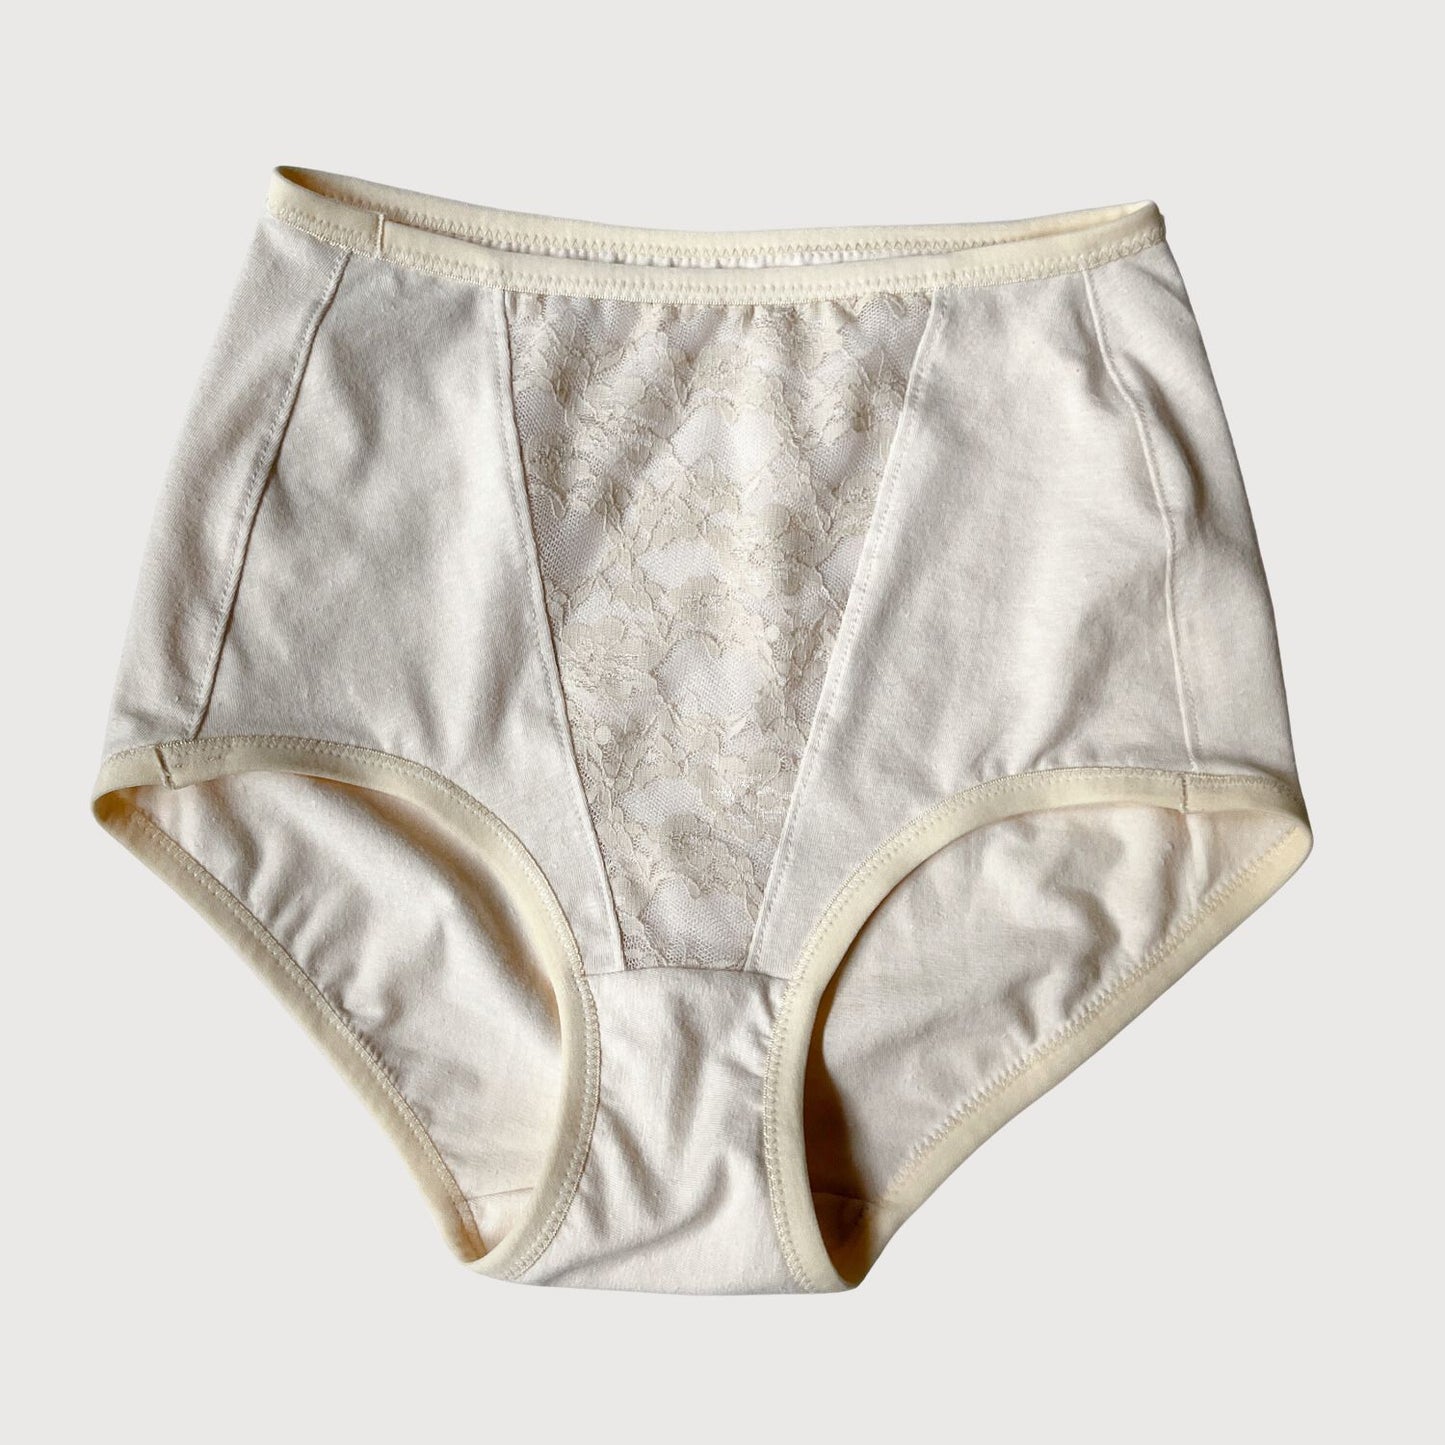 natural organic cotton french brief